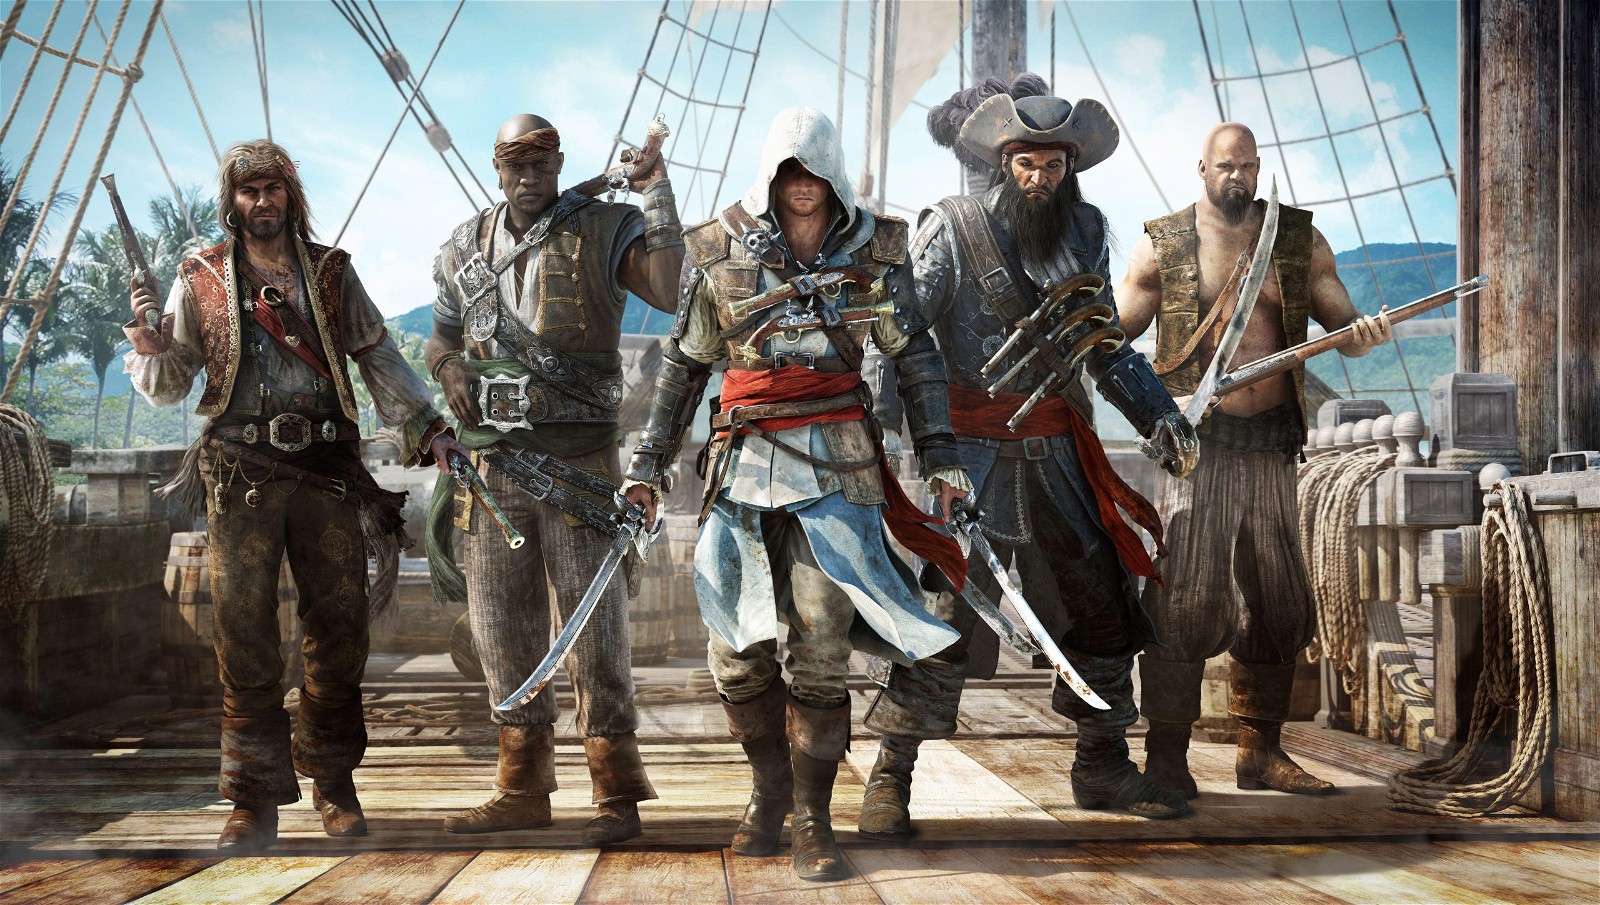 Assassin's Creed Black Flag slightly touched on the Spanish conquest, but didn't explore it deeply.